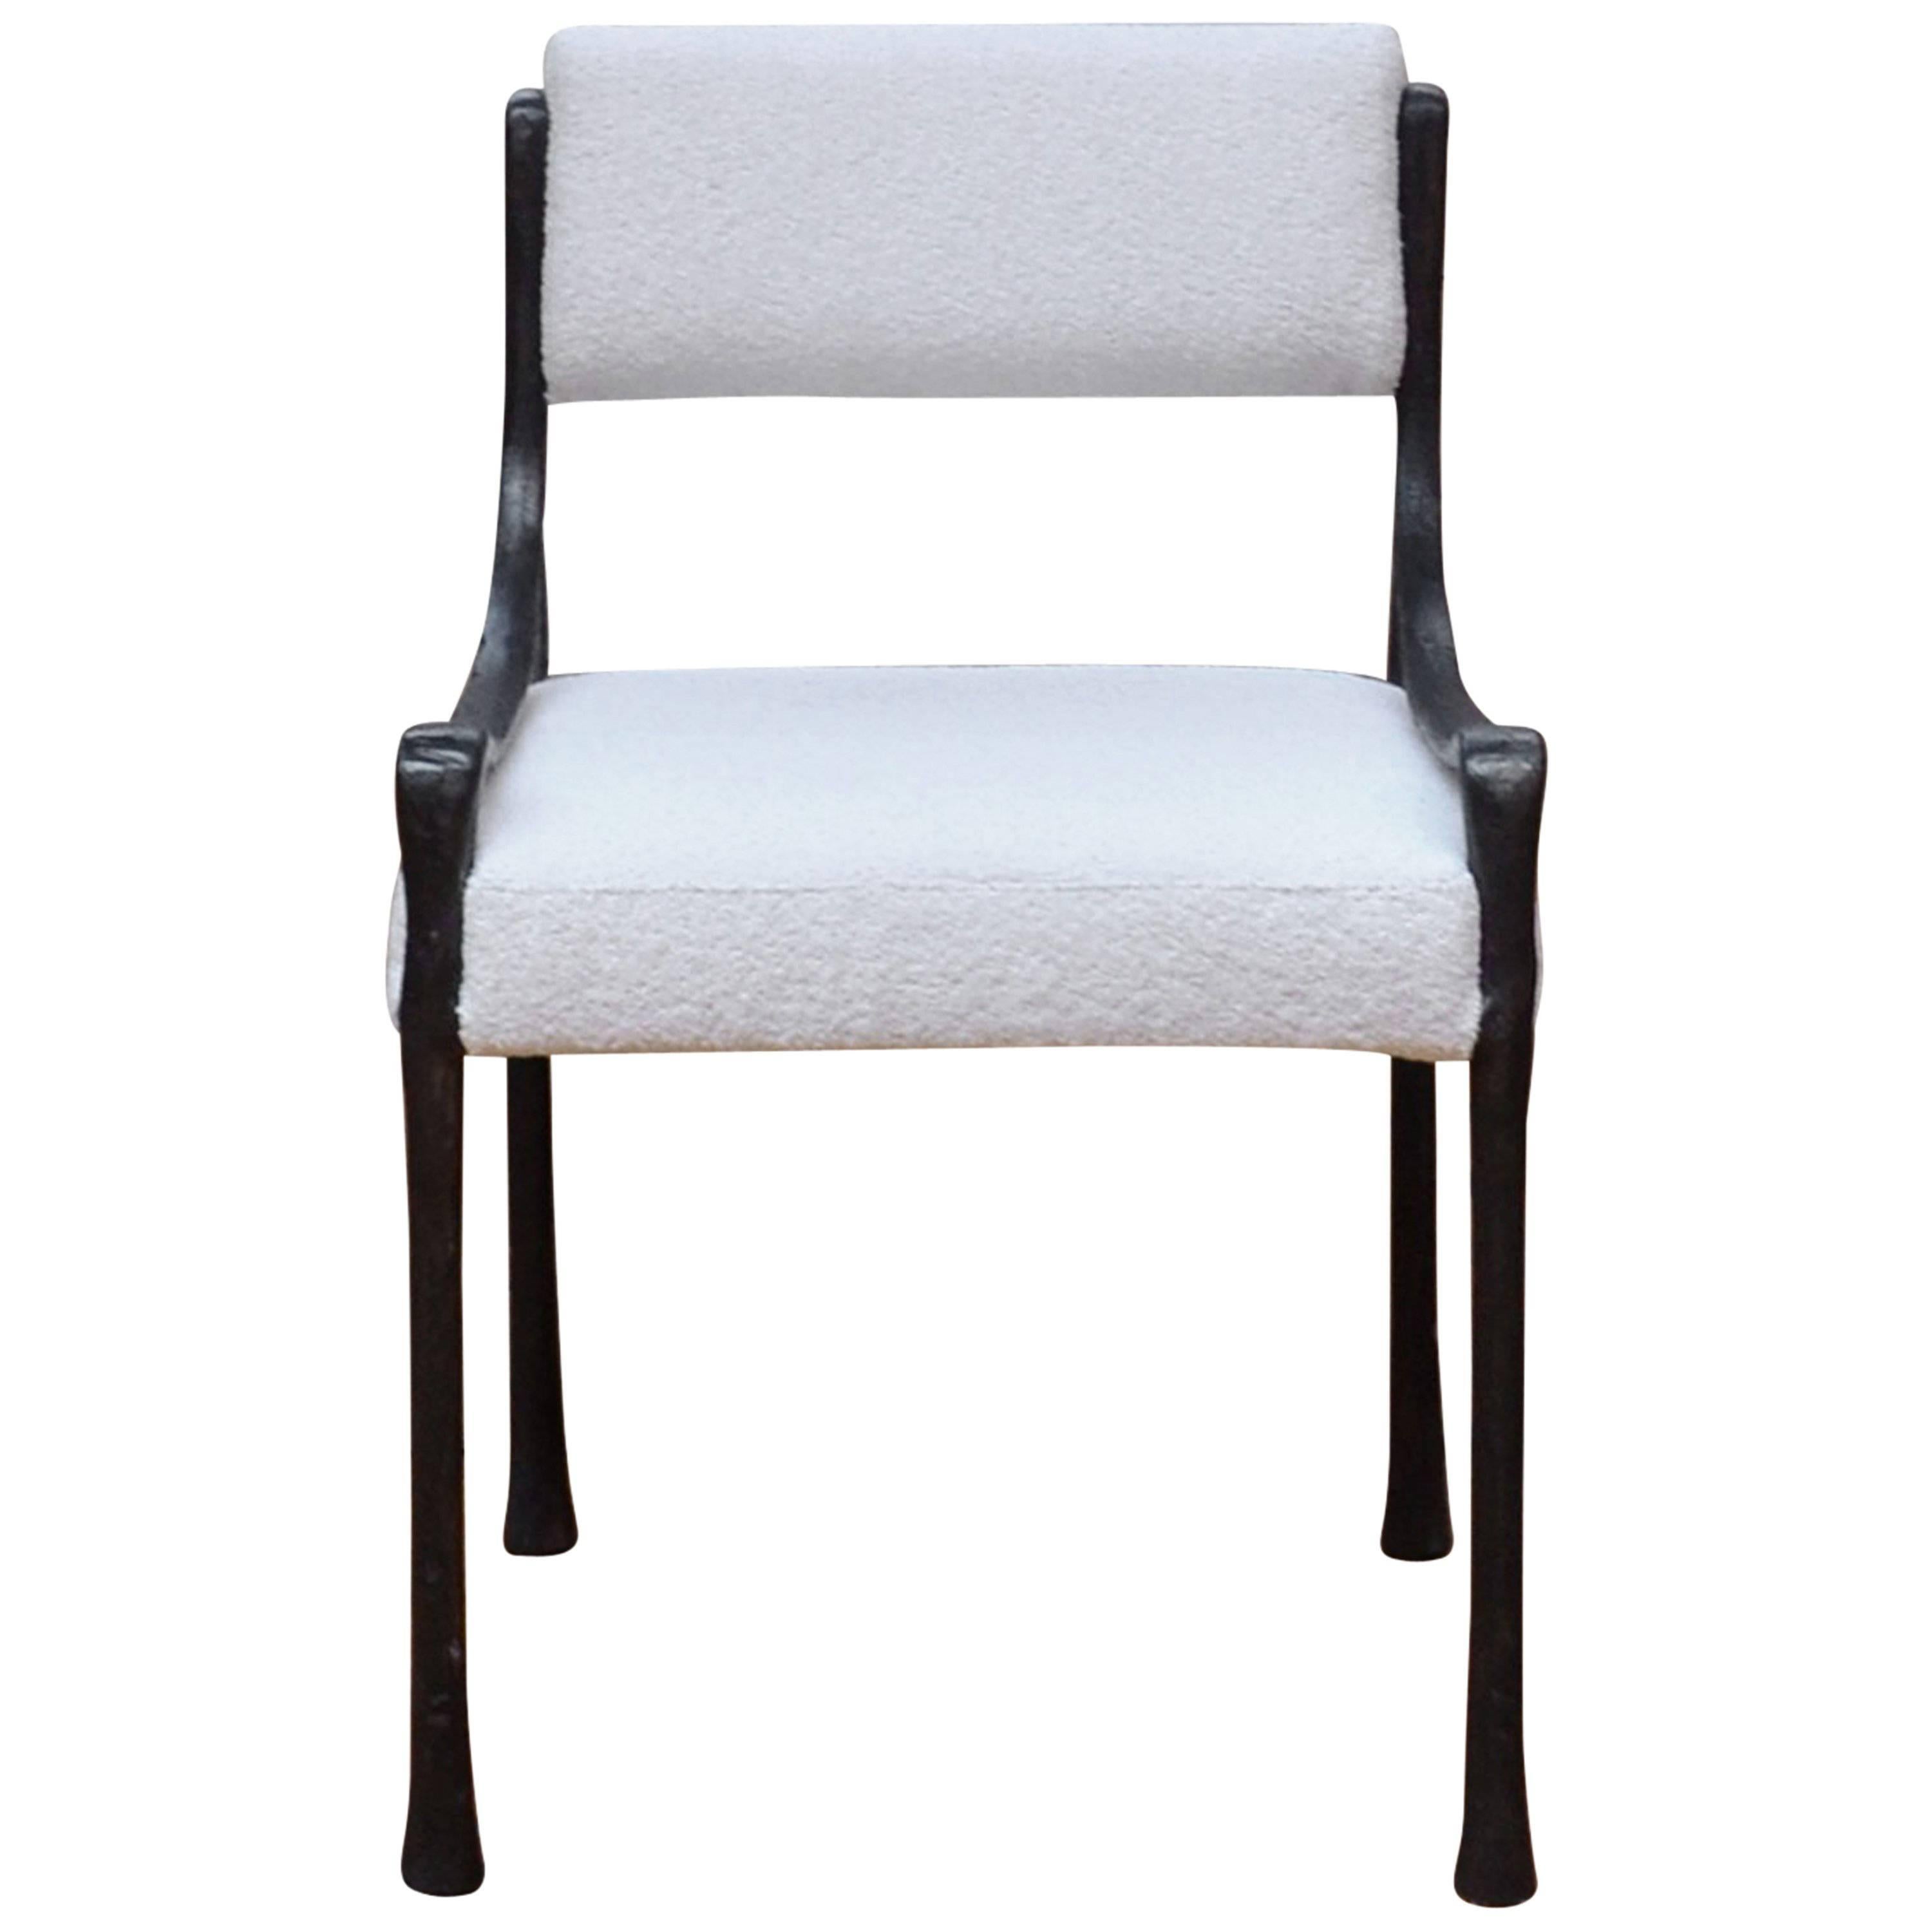 Giac Side Chair Art Deco Inspired Low-Arm Seat with Upholstered Cast Metal Frame For Sale